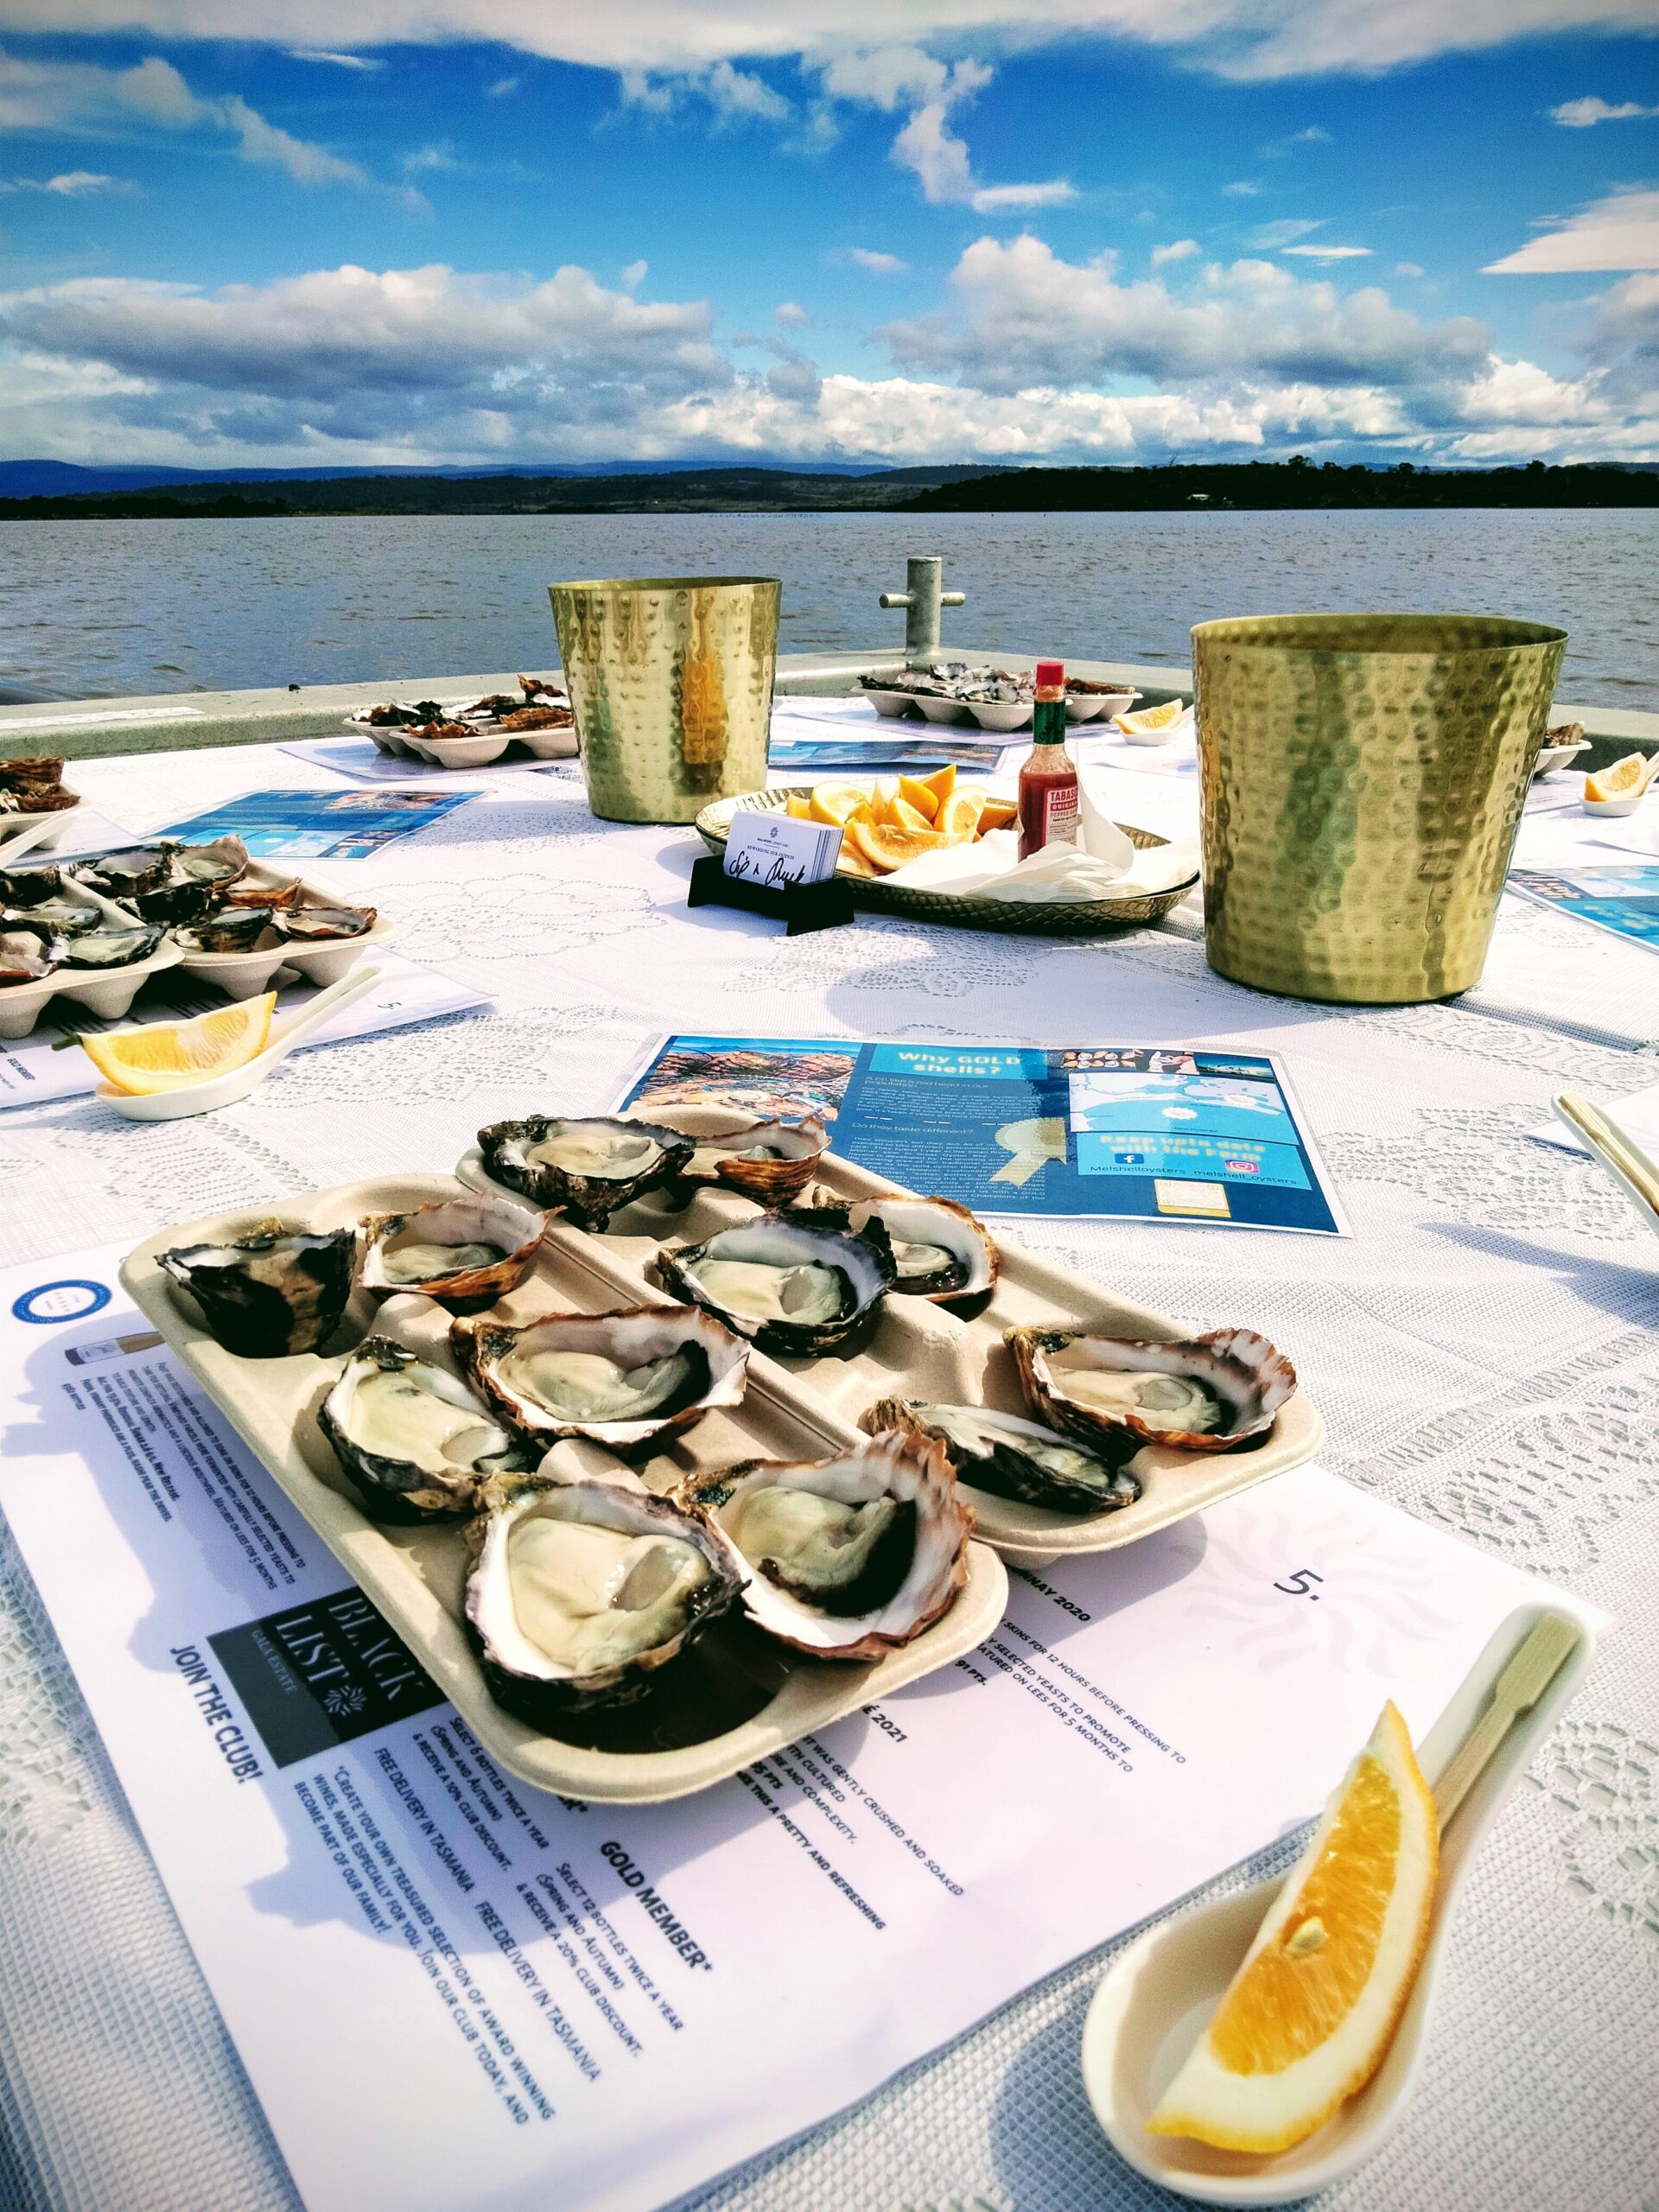 OYSTER FARM LUNCH WITH SHUCKING LESSON AND FARMING STORY